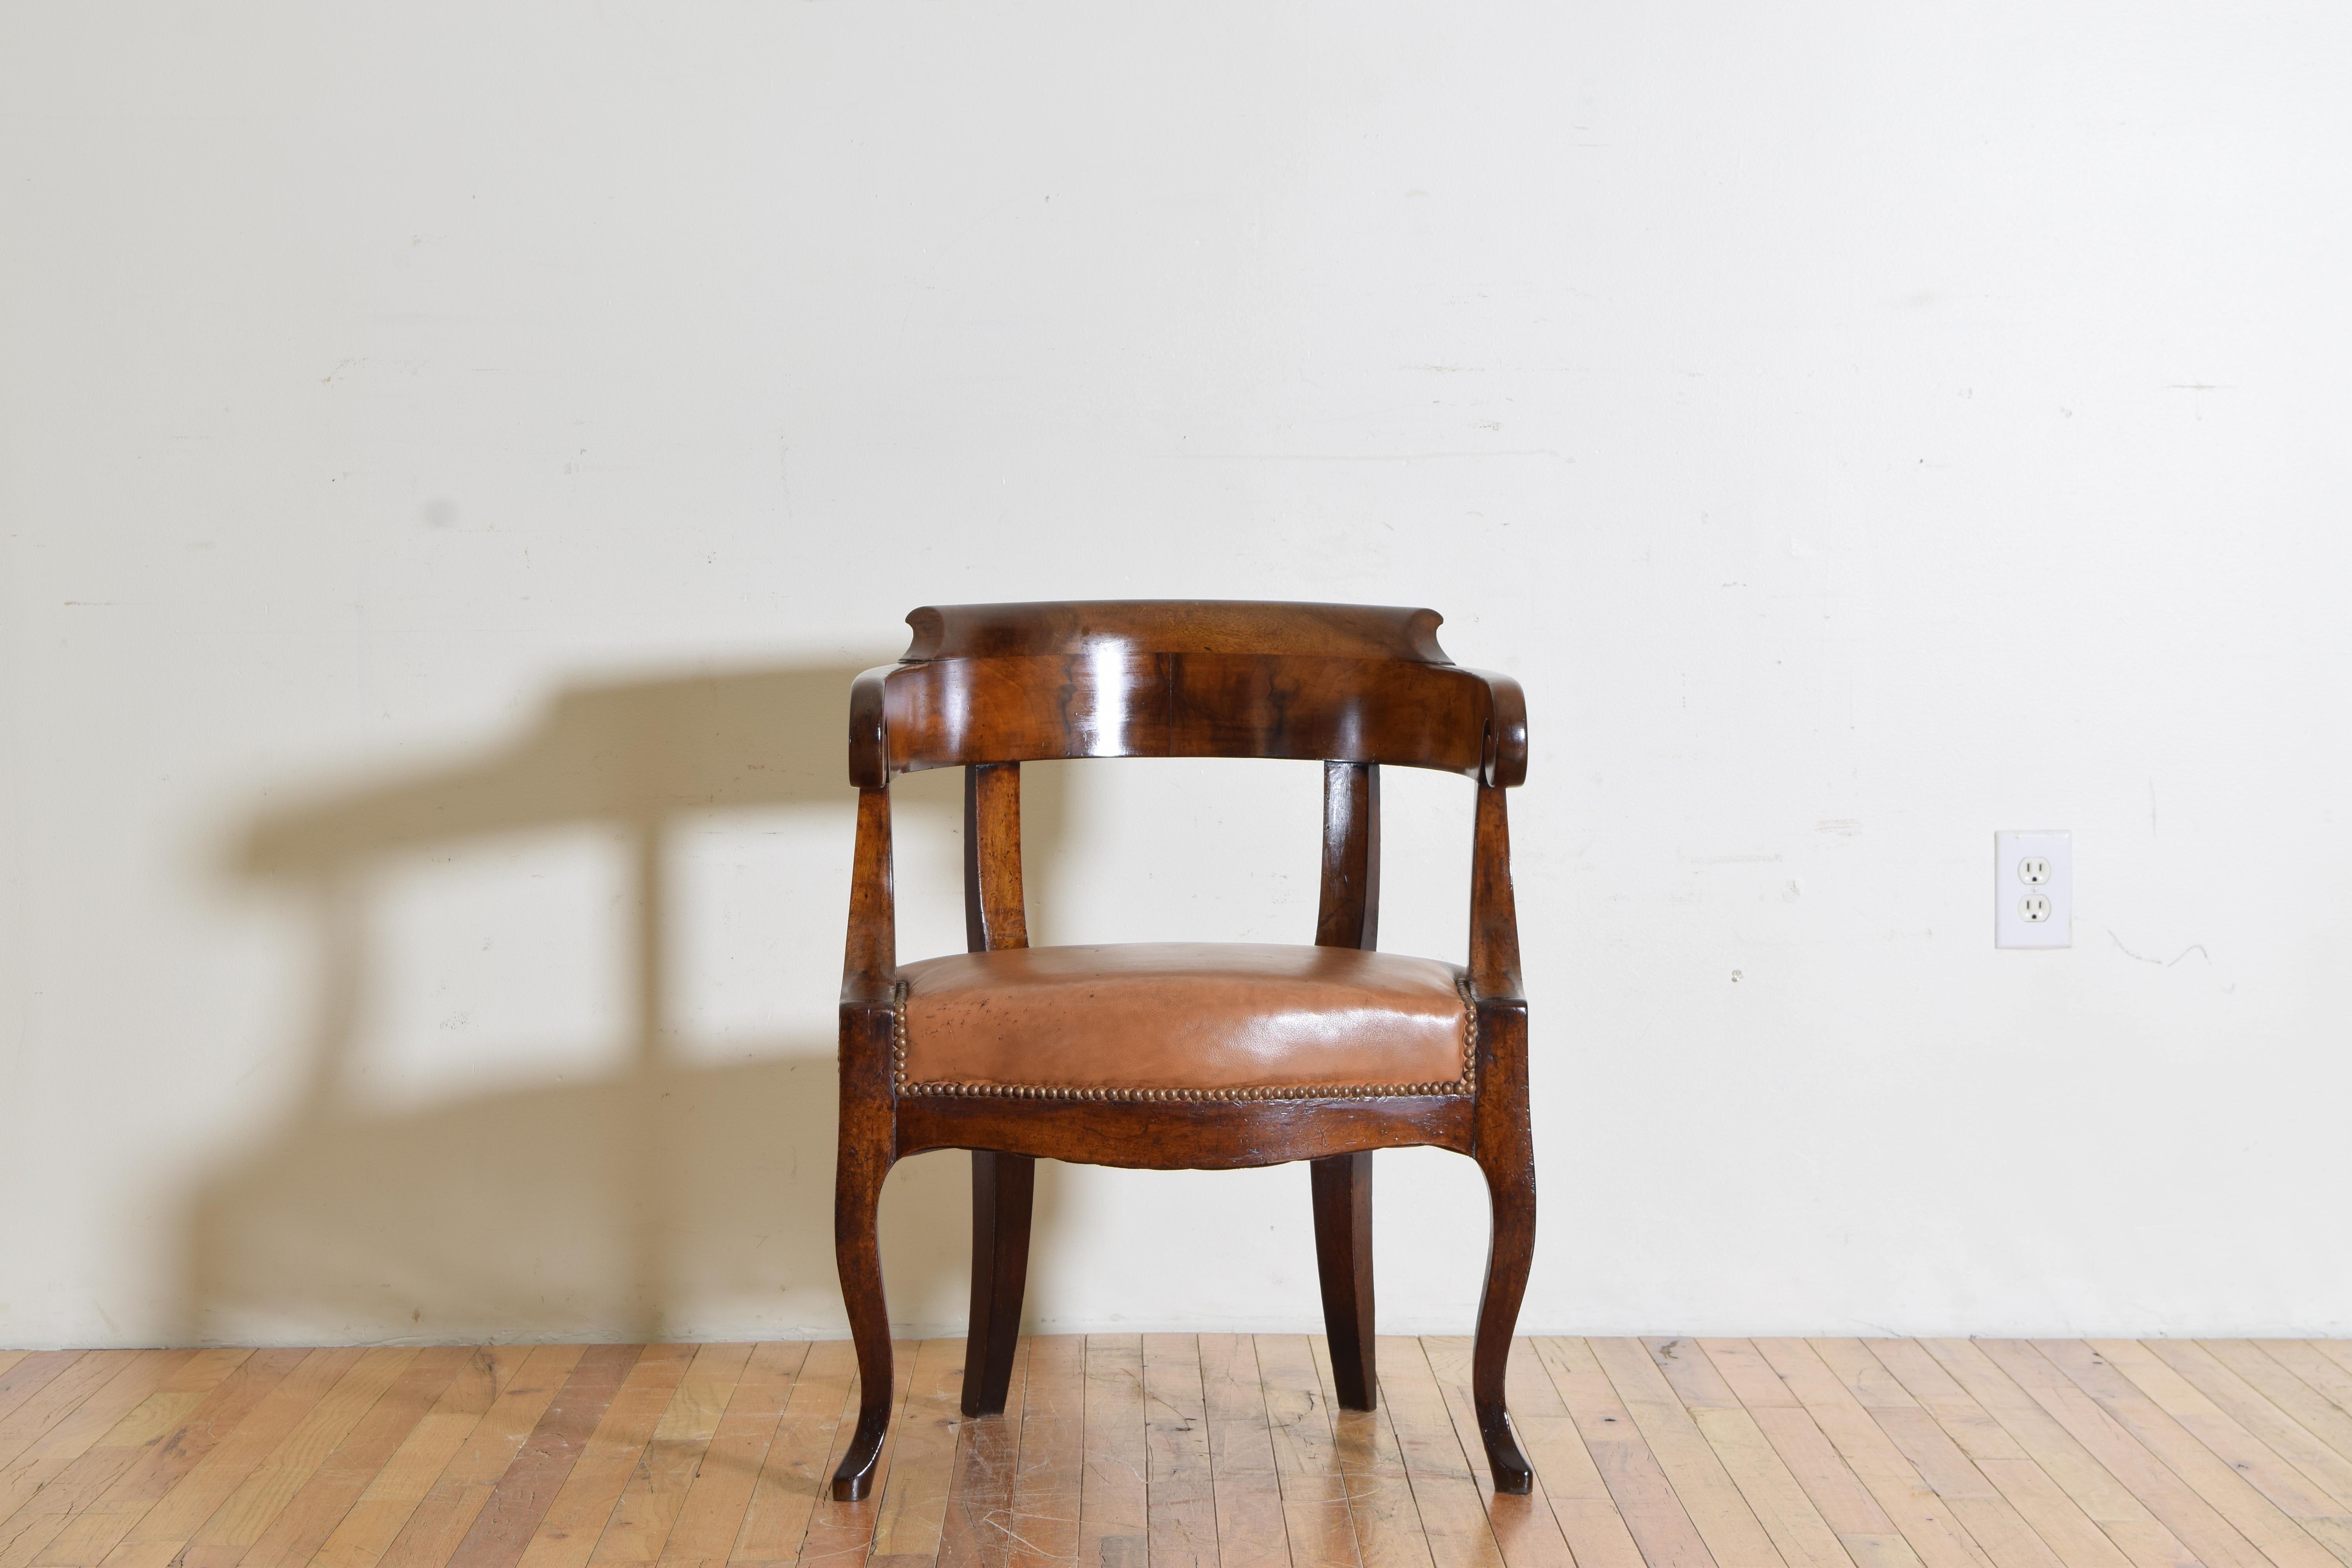 Mid-19th Century French Louis Philippe Walnut and Leather Upholstered Desk Chair, 2ndq 19th Cen